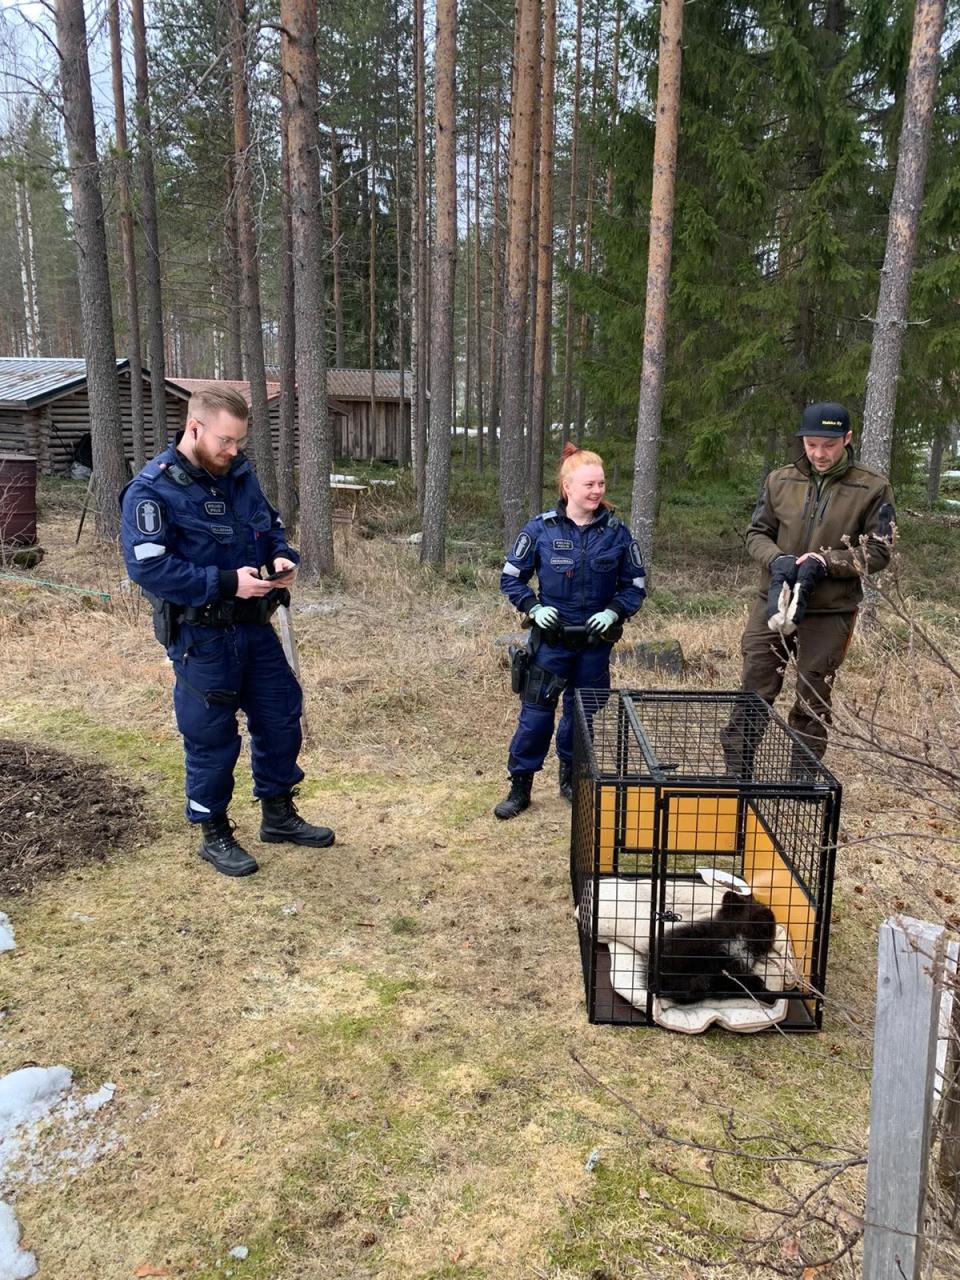 See: An orphaned bear cub was rescued in the yard after wandering